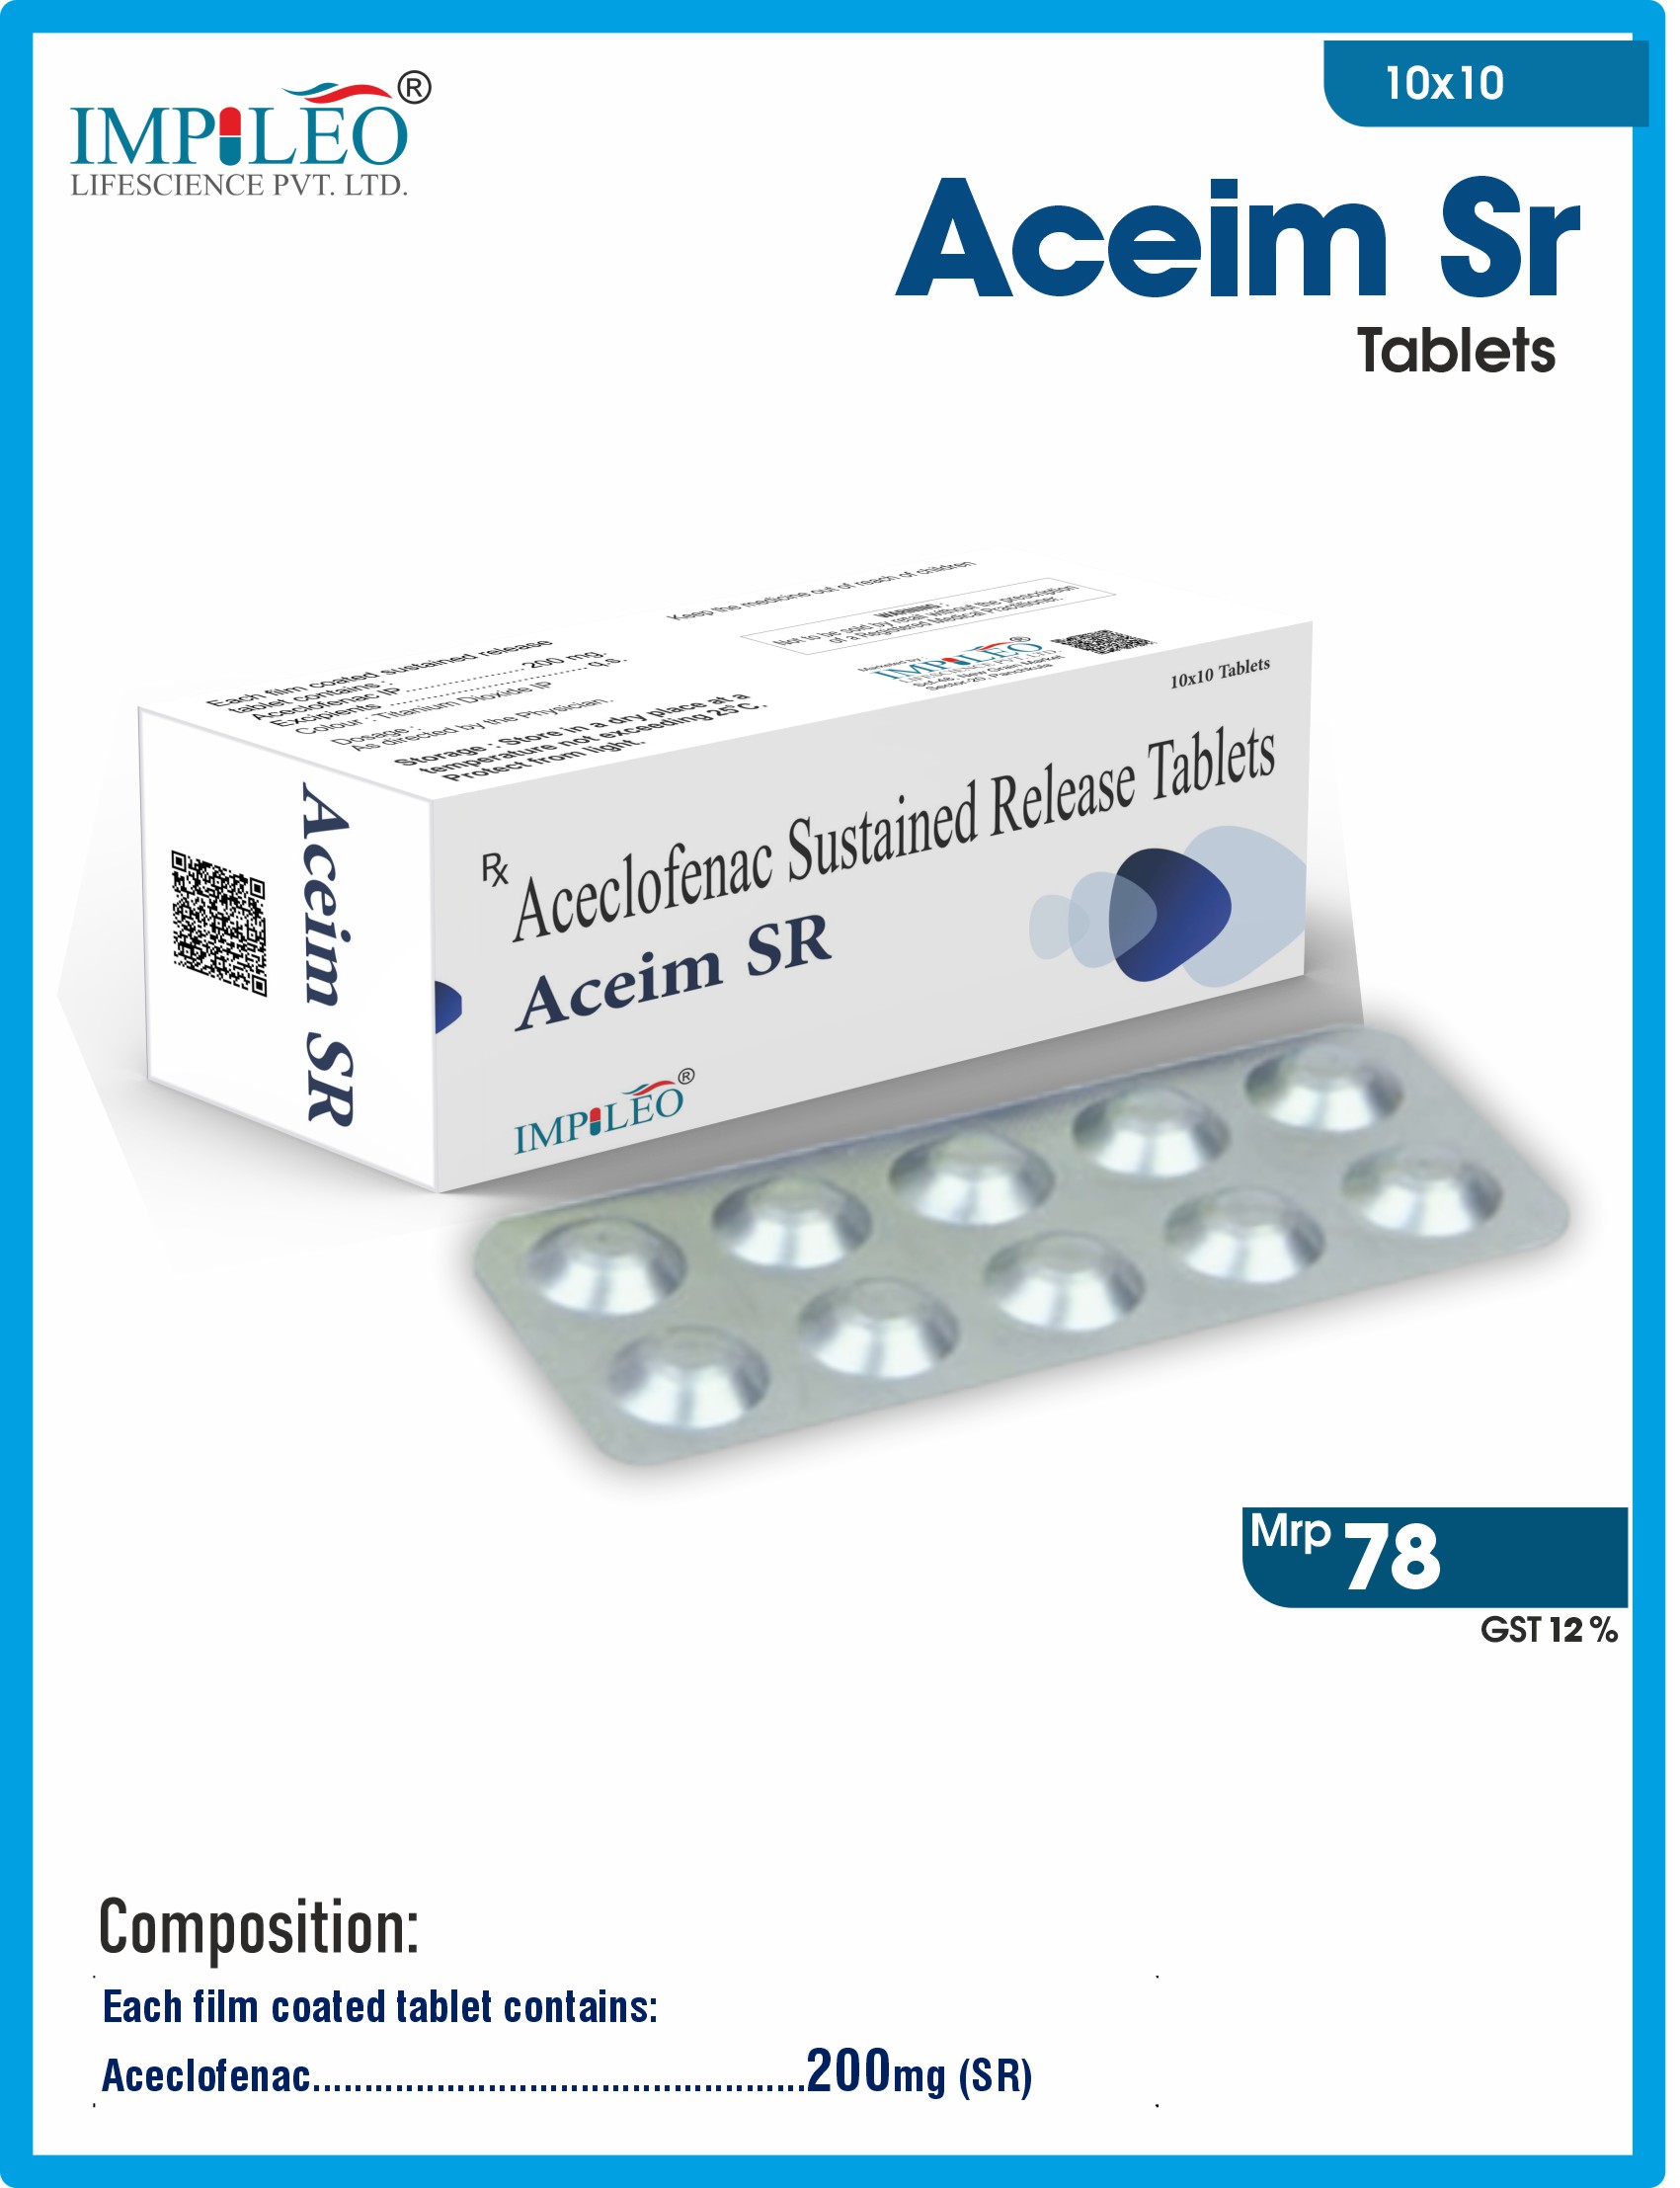 Premium Aceclofenac ACEIM-SR Tablets by Trusted Third-Party Manufacturing in India